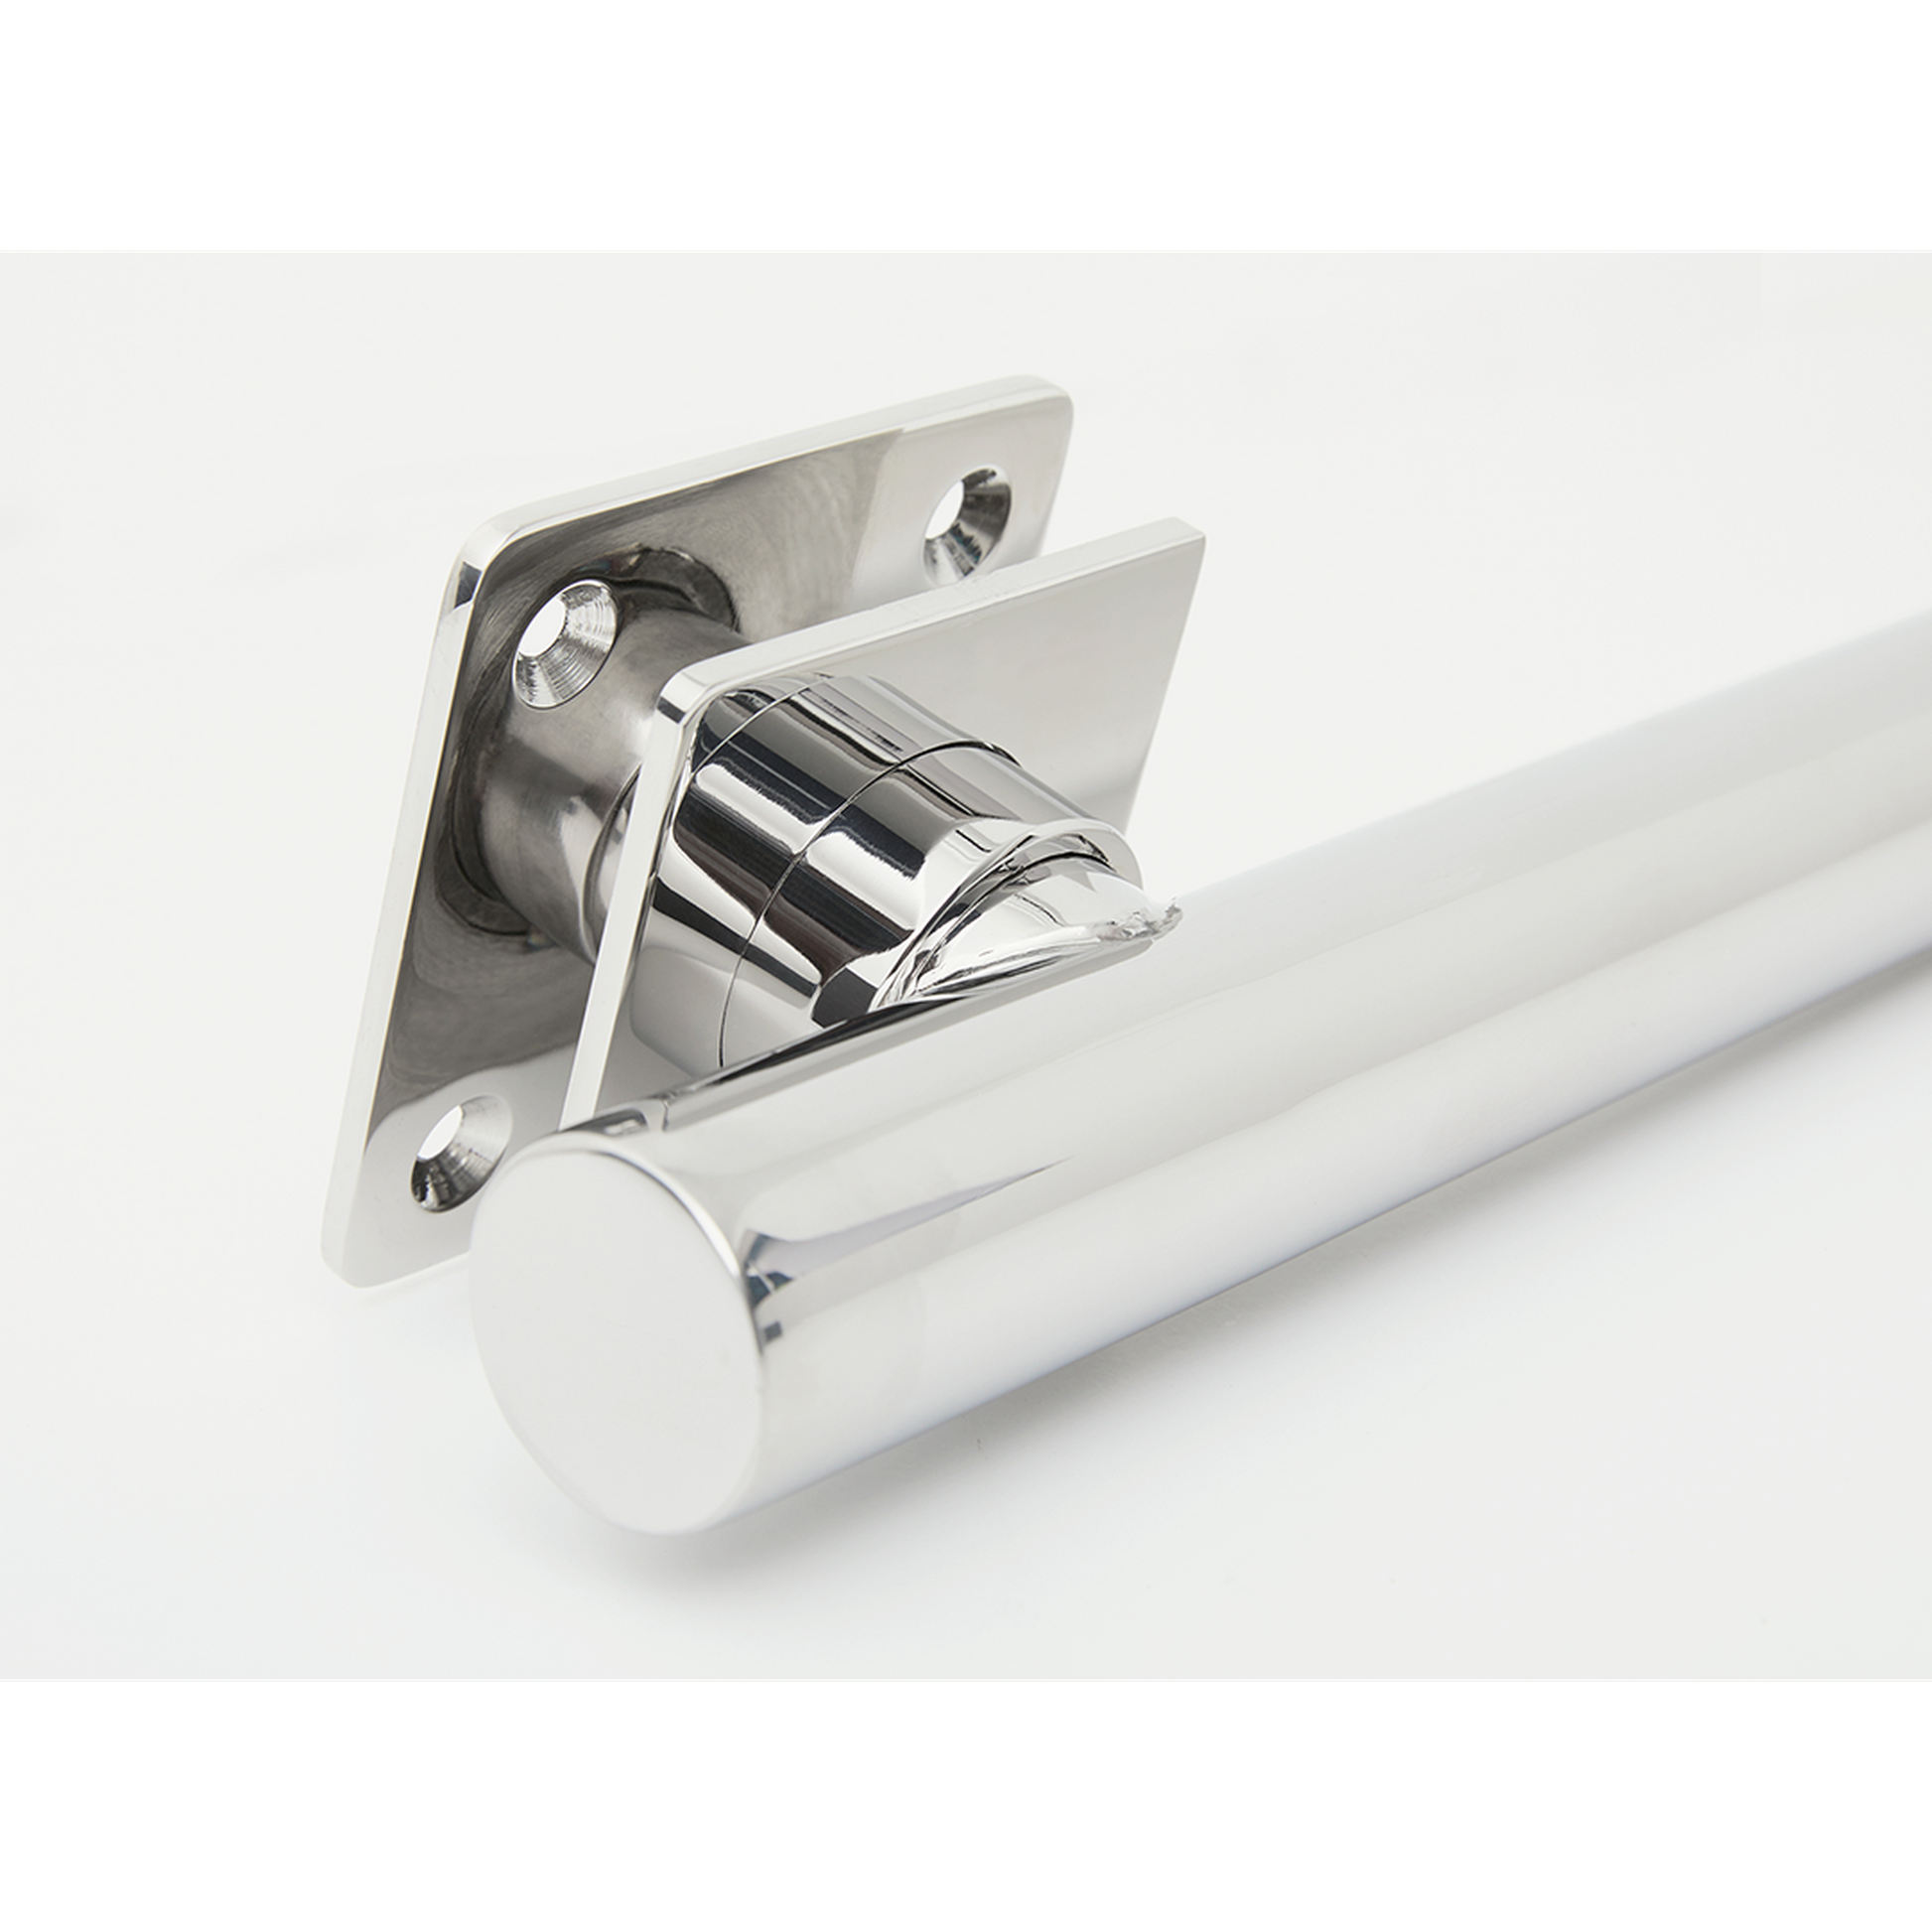 Seachrome Coronado 48" Polished Stainless Steel 1.25" Concealed Square Flange Grab Bar